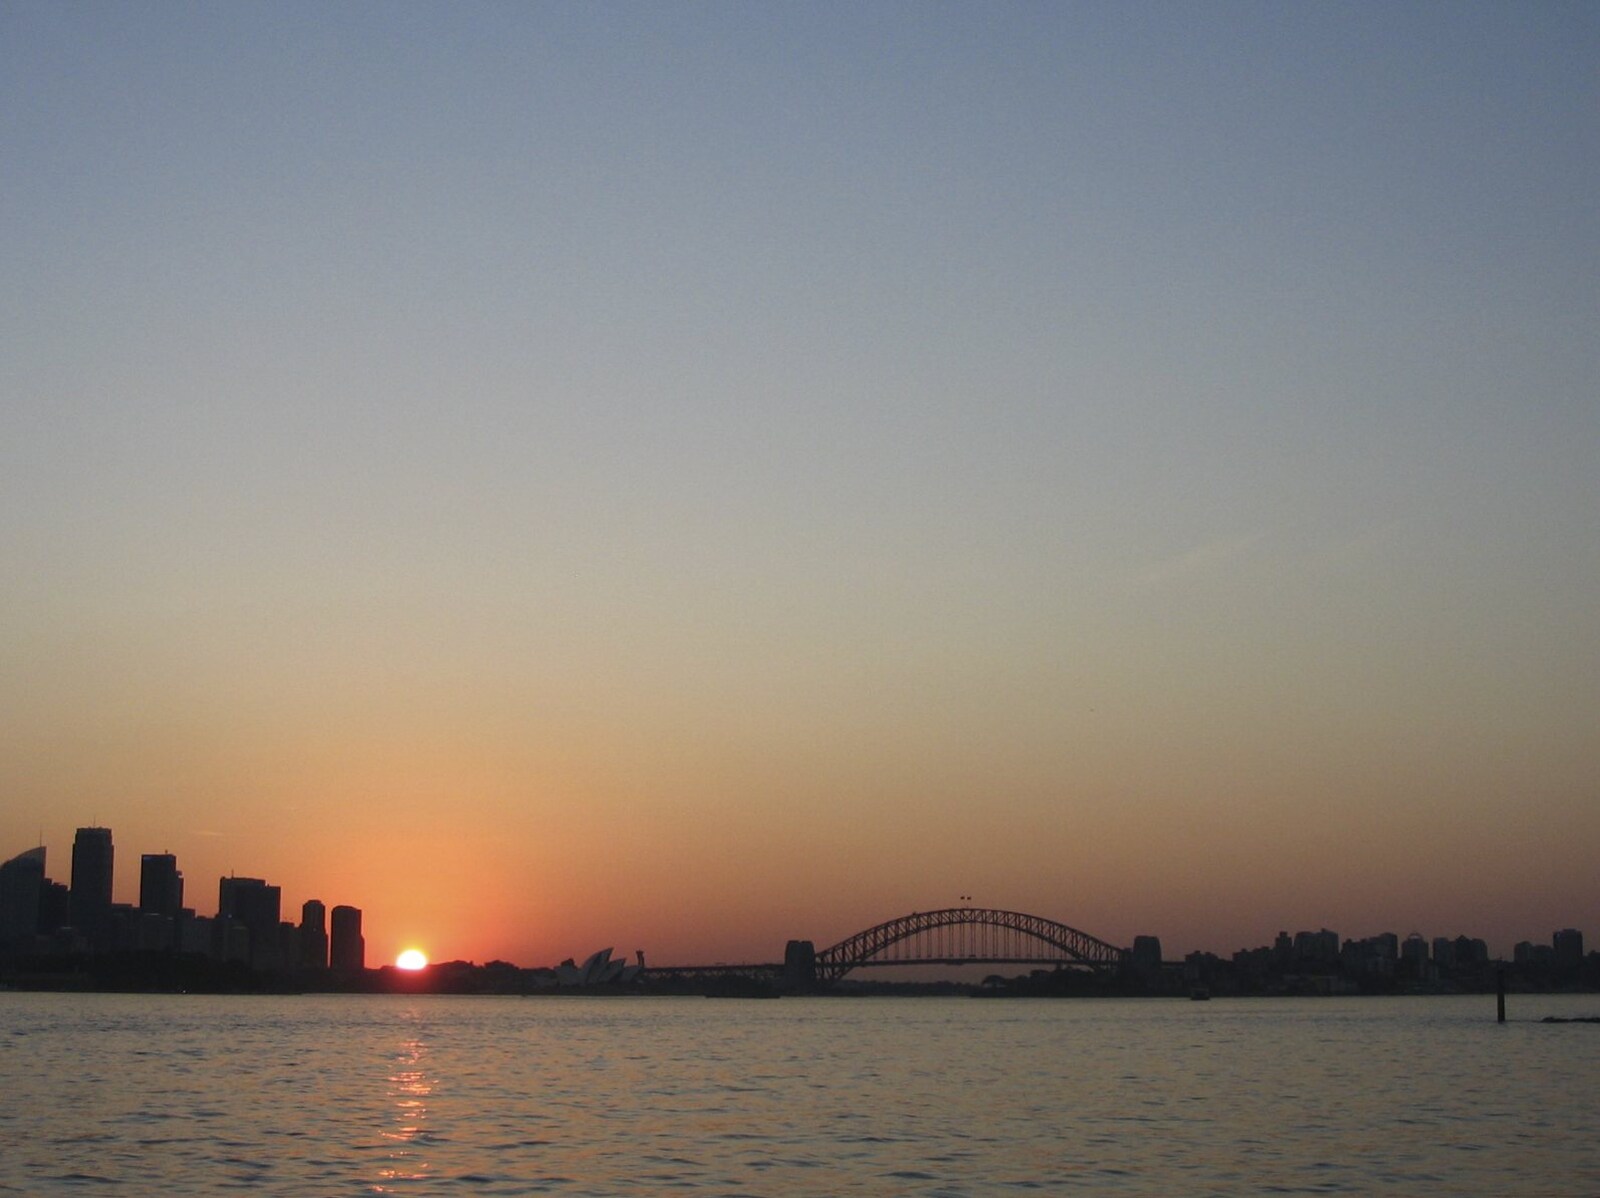 The bridge in sunset from Sydney, New South Wales, Australia - 10th October 2004